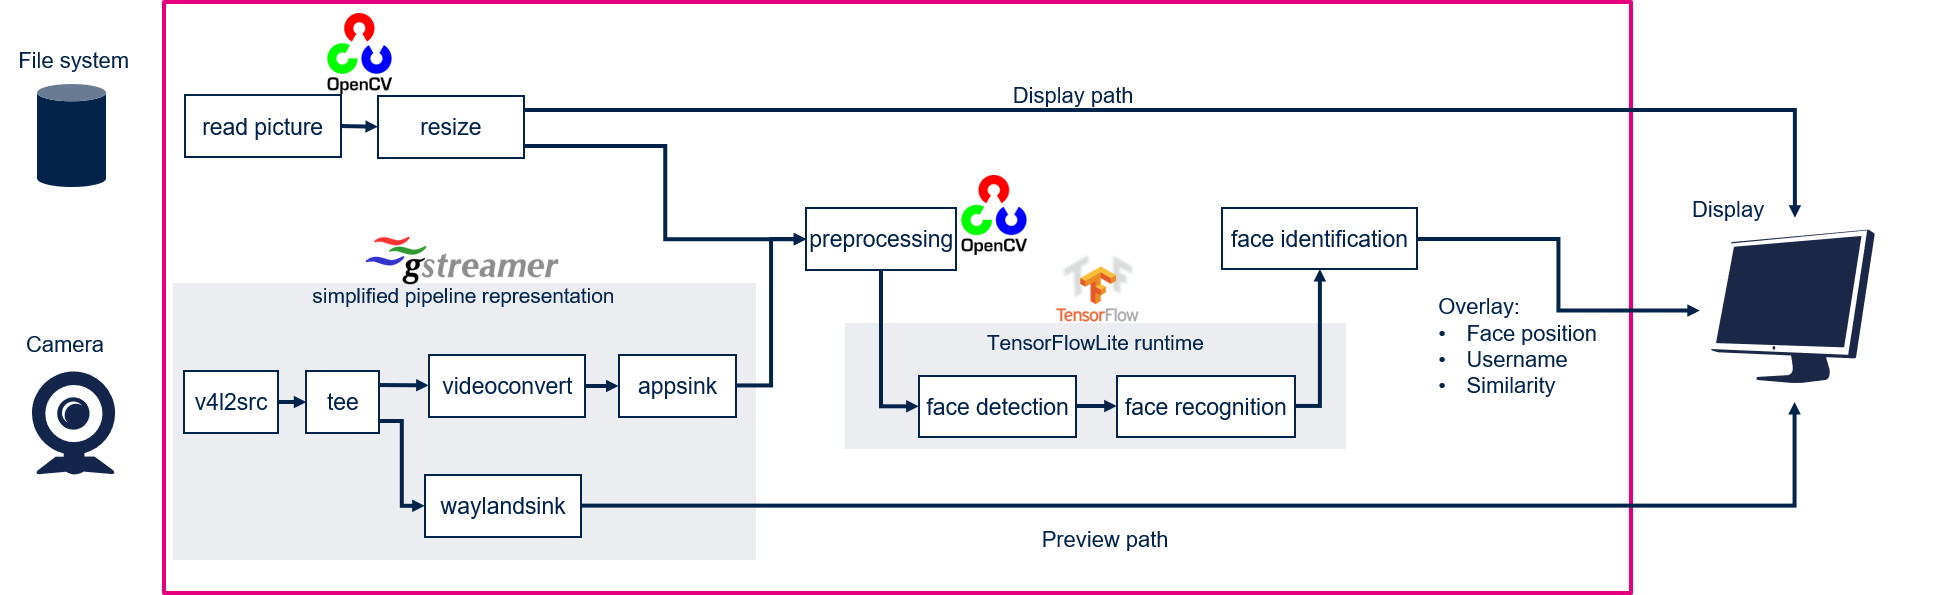 Face recognition pipeline